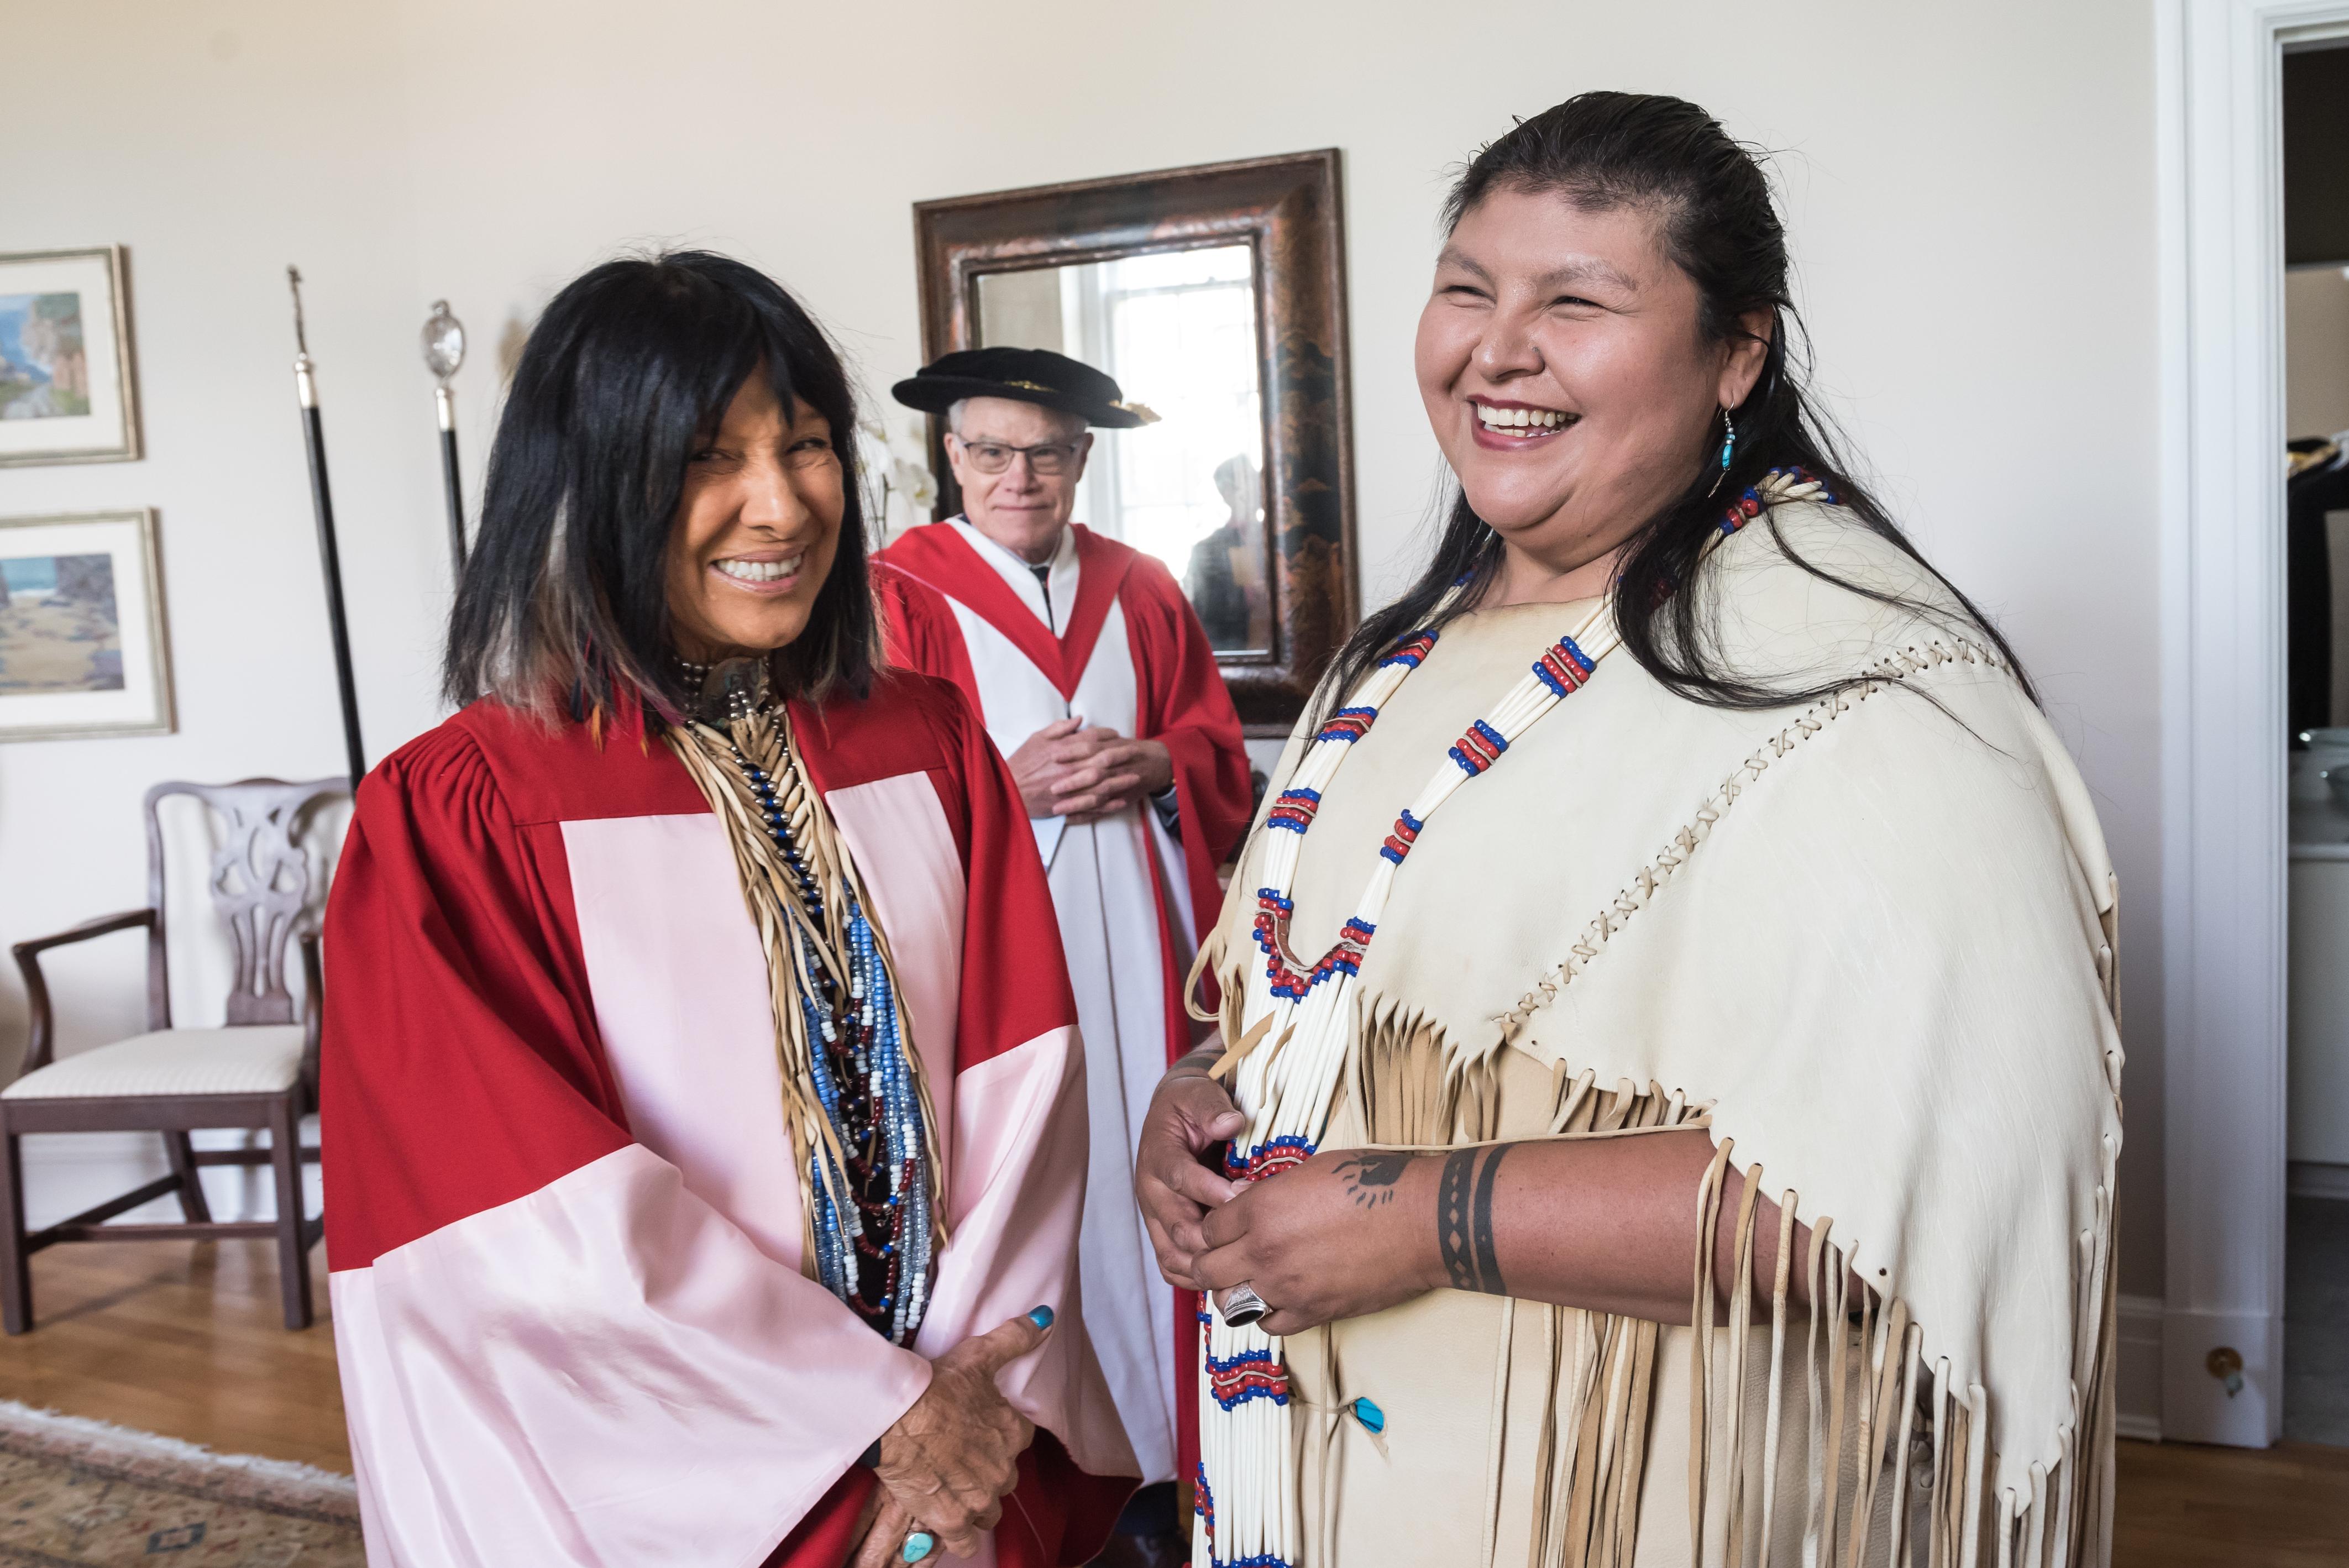 Elder Wendy Phillips smiling with honorary graduate Buffy Sainte Marie, with Vice-President & Principal Bruce Kidd in background